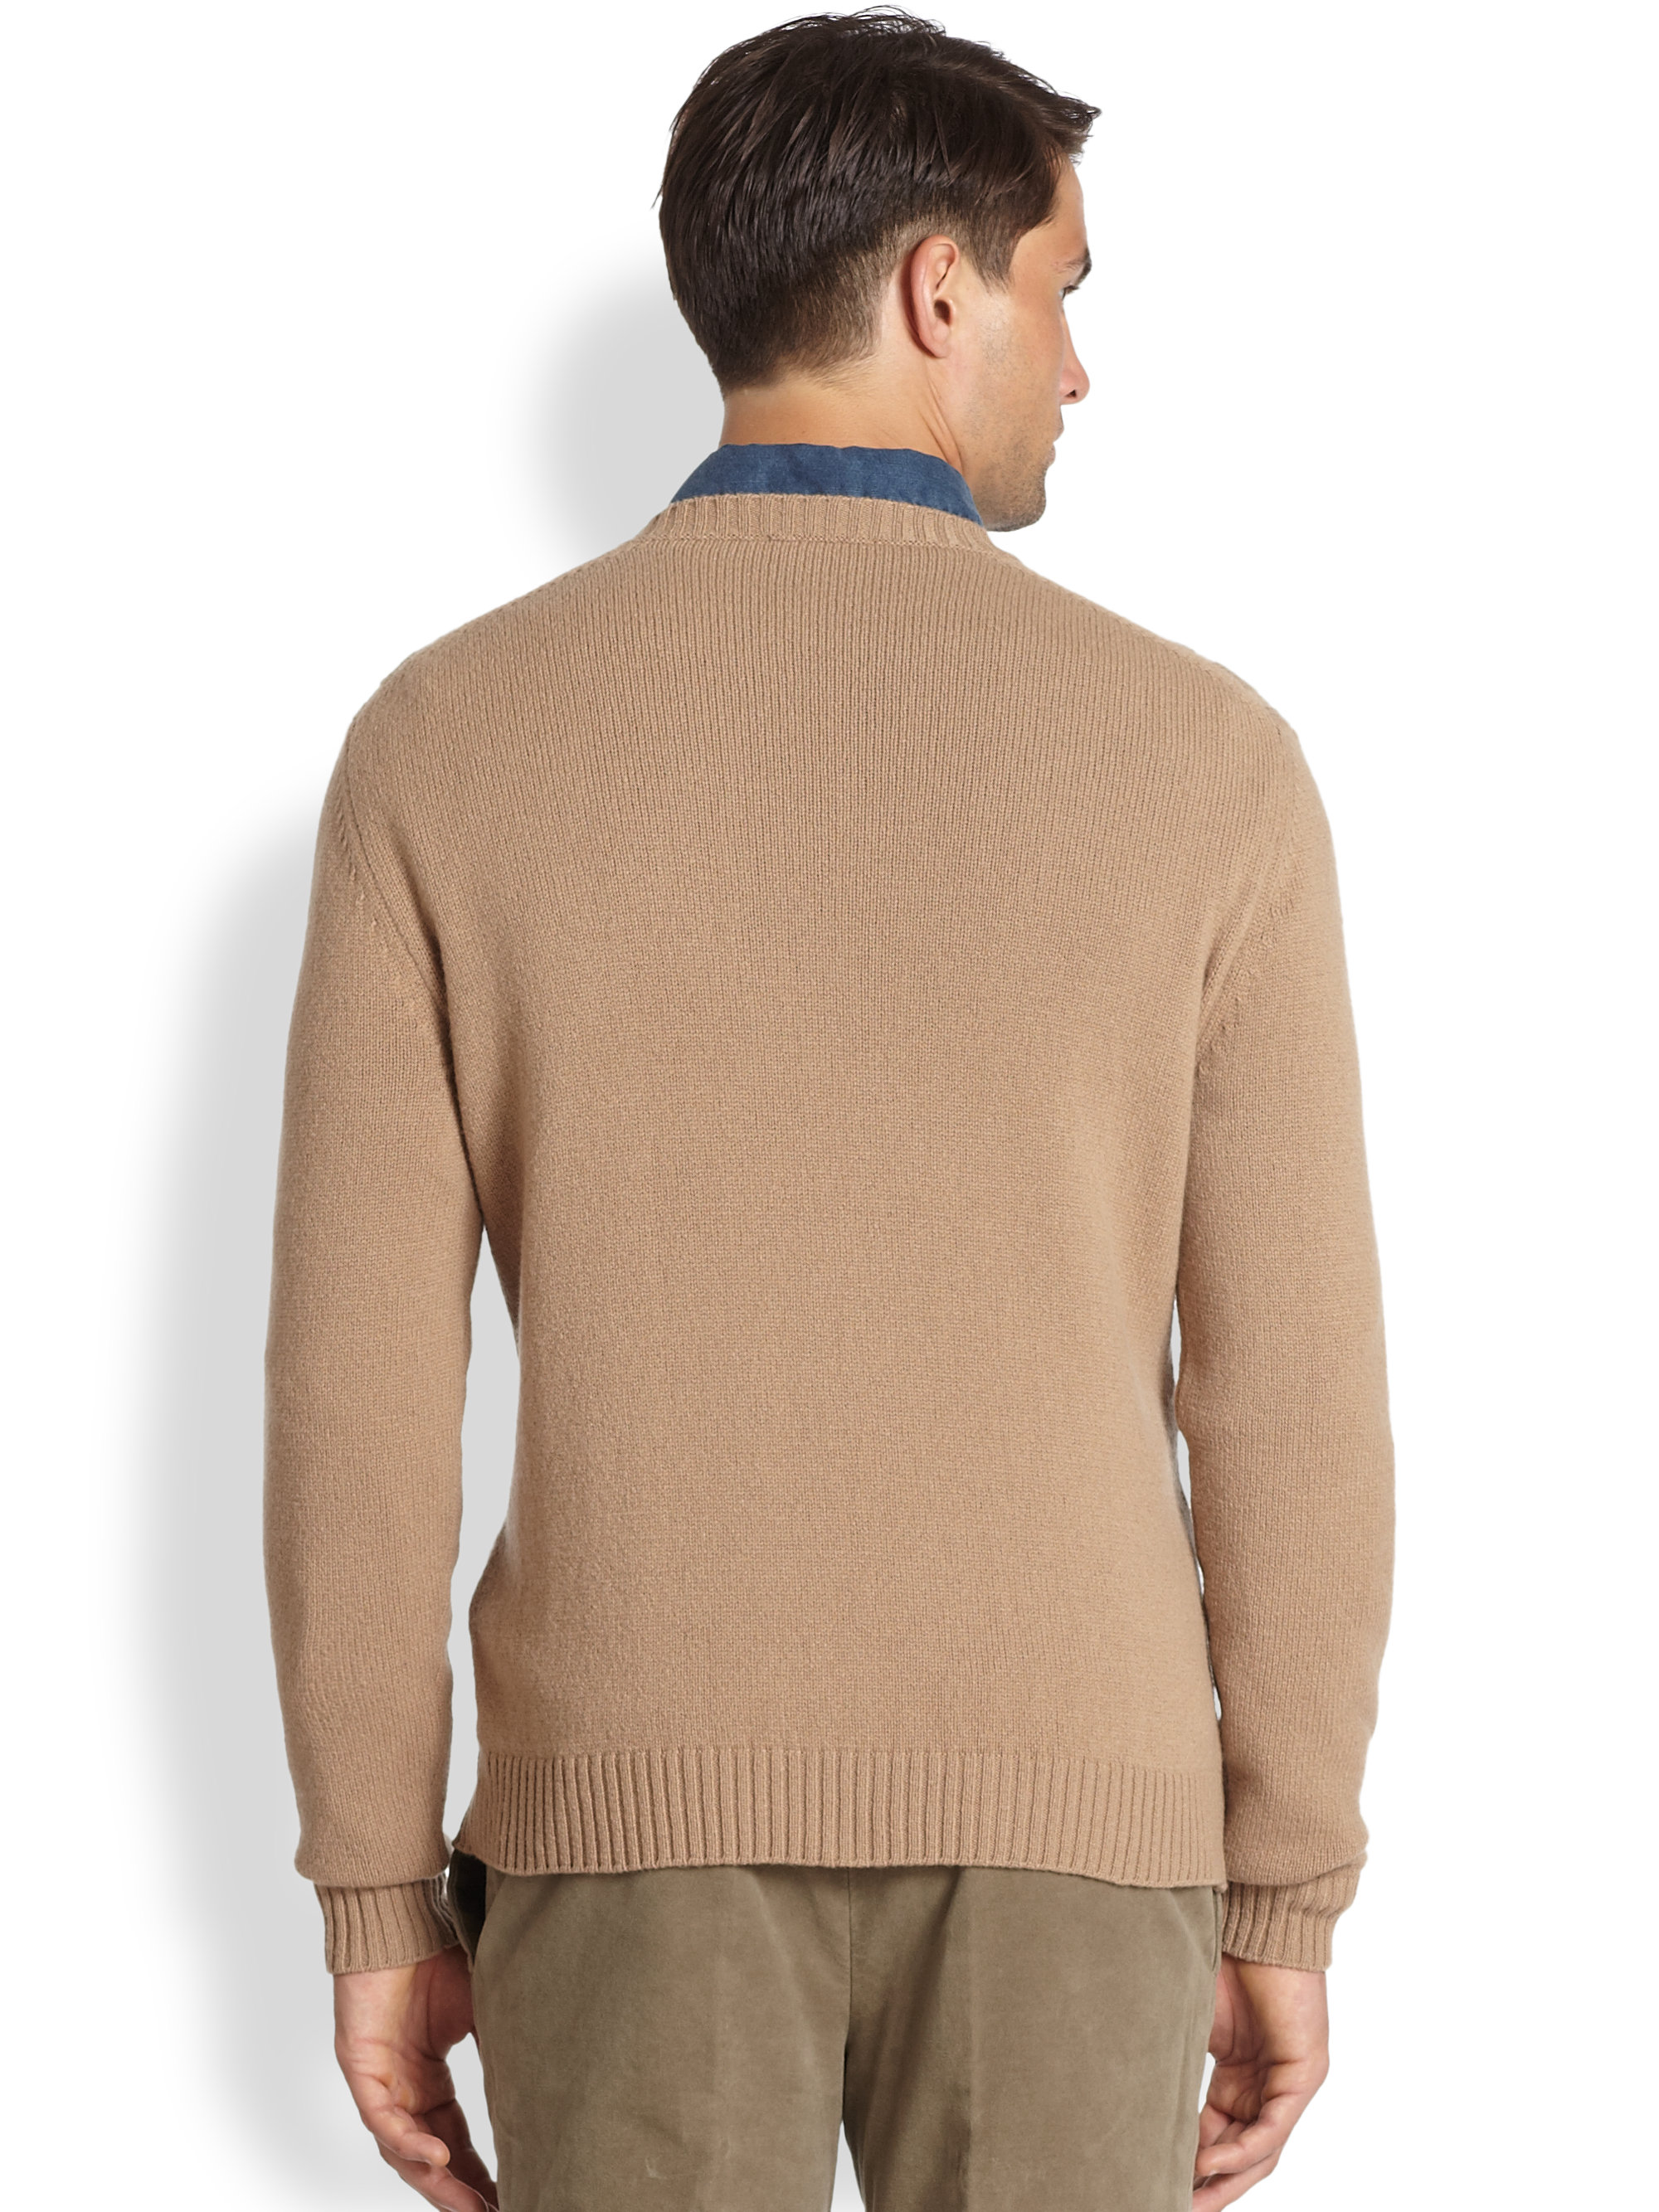 Lyst - Slowear Zanone Wool Cable Knit Sweater in Natural for Men